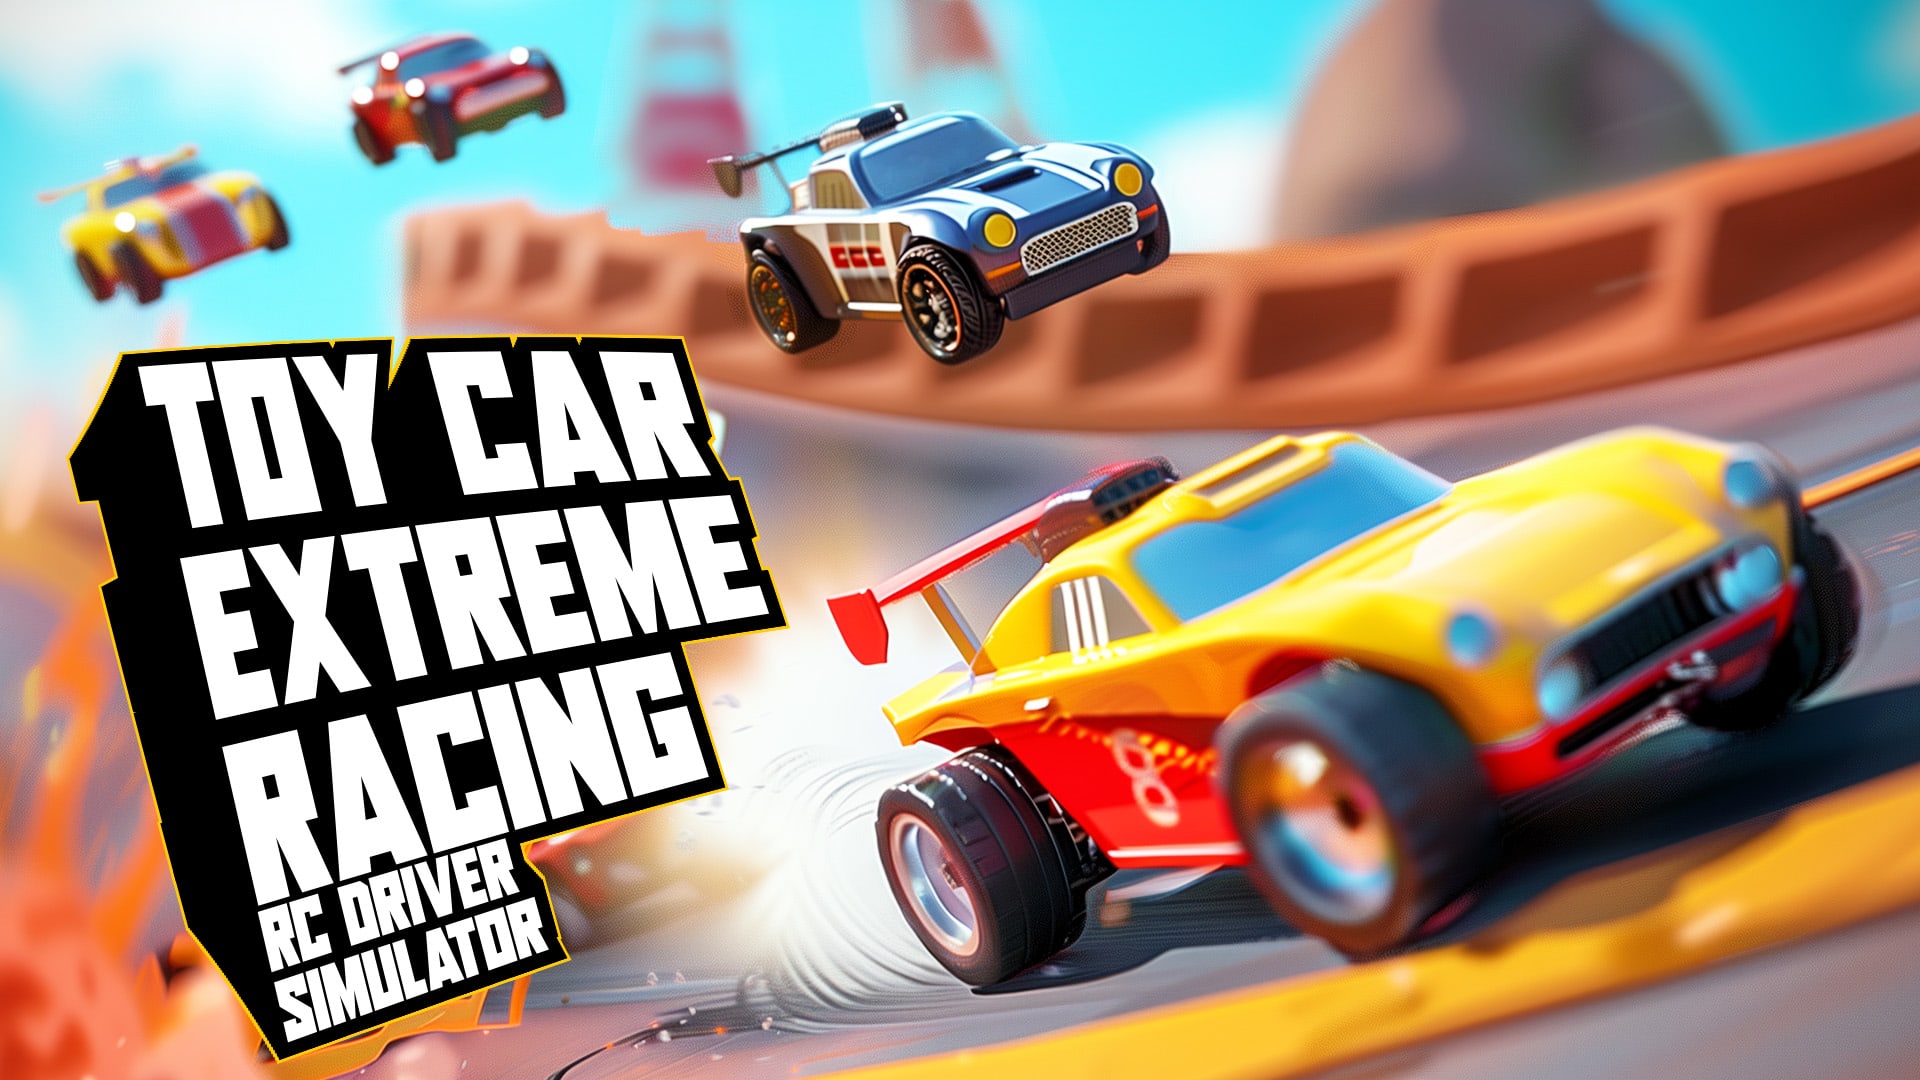 Toy Car Extreme Racing: RC Driver Simulator 1